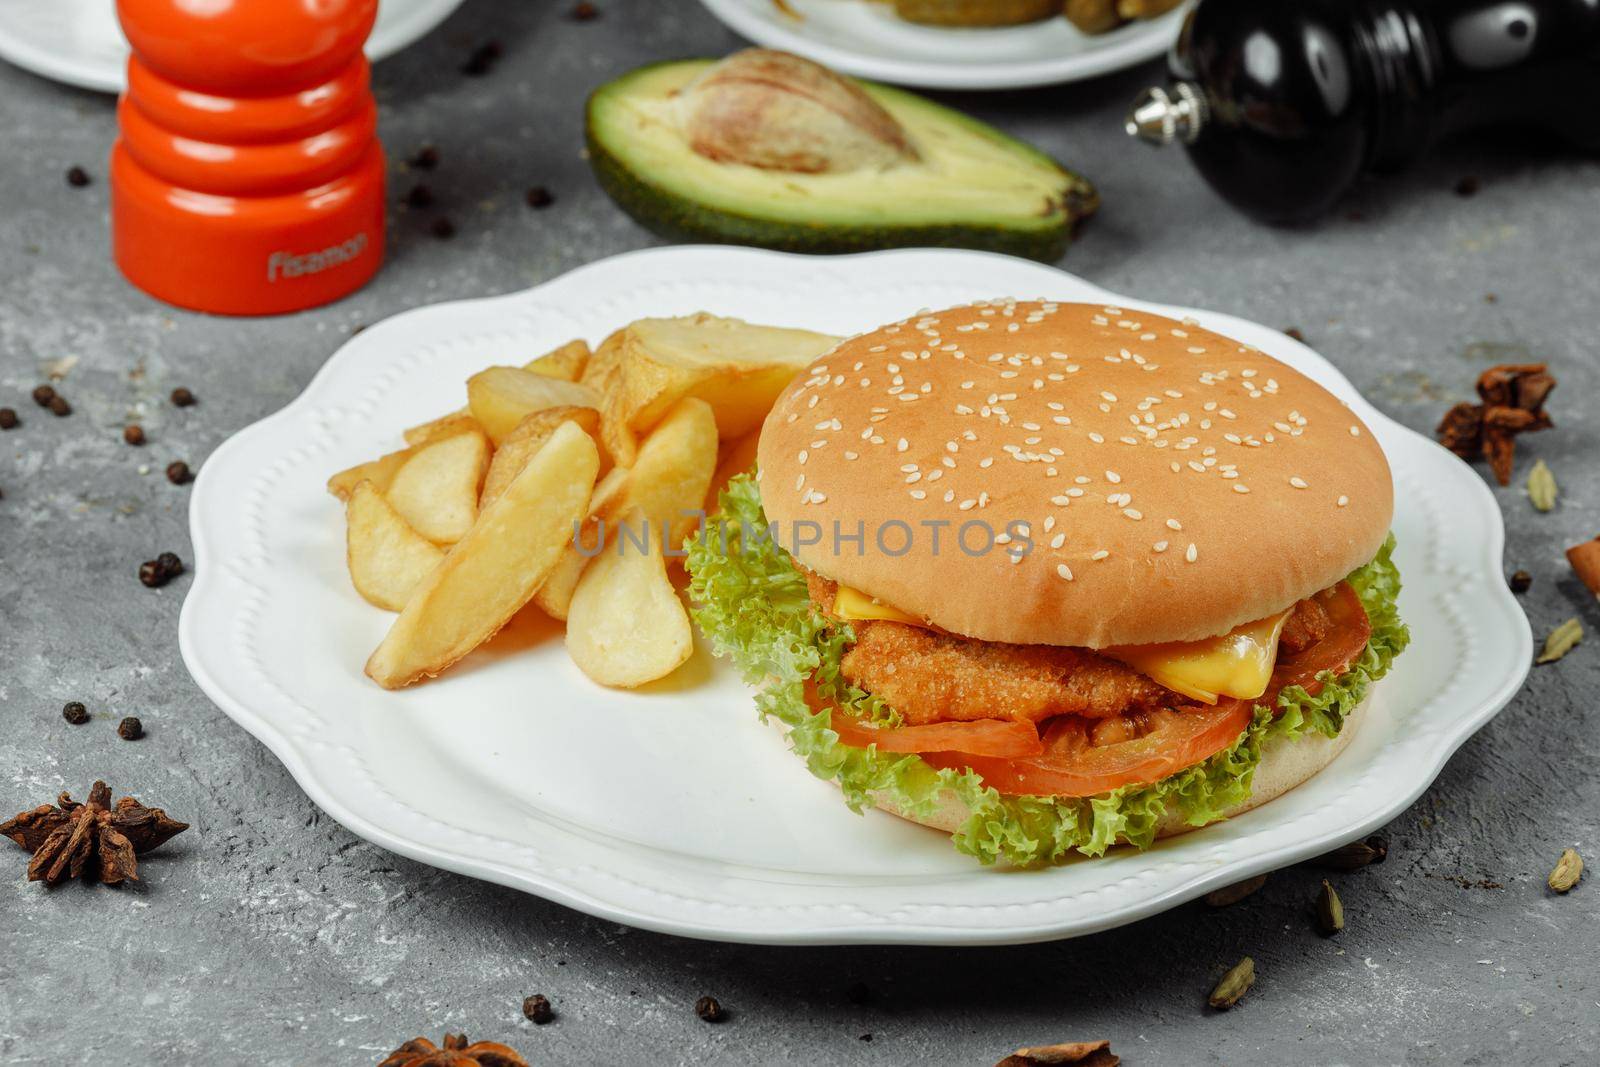 hamburger with fries and salad on the plate.